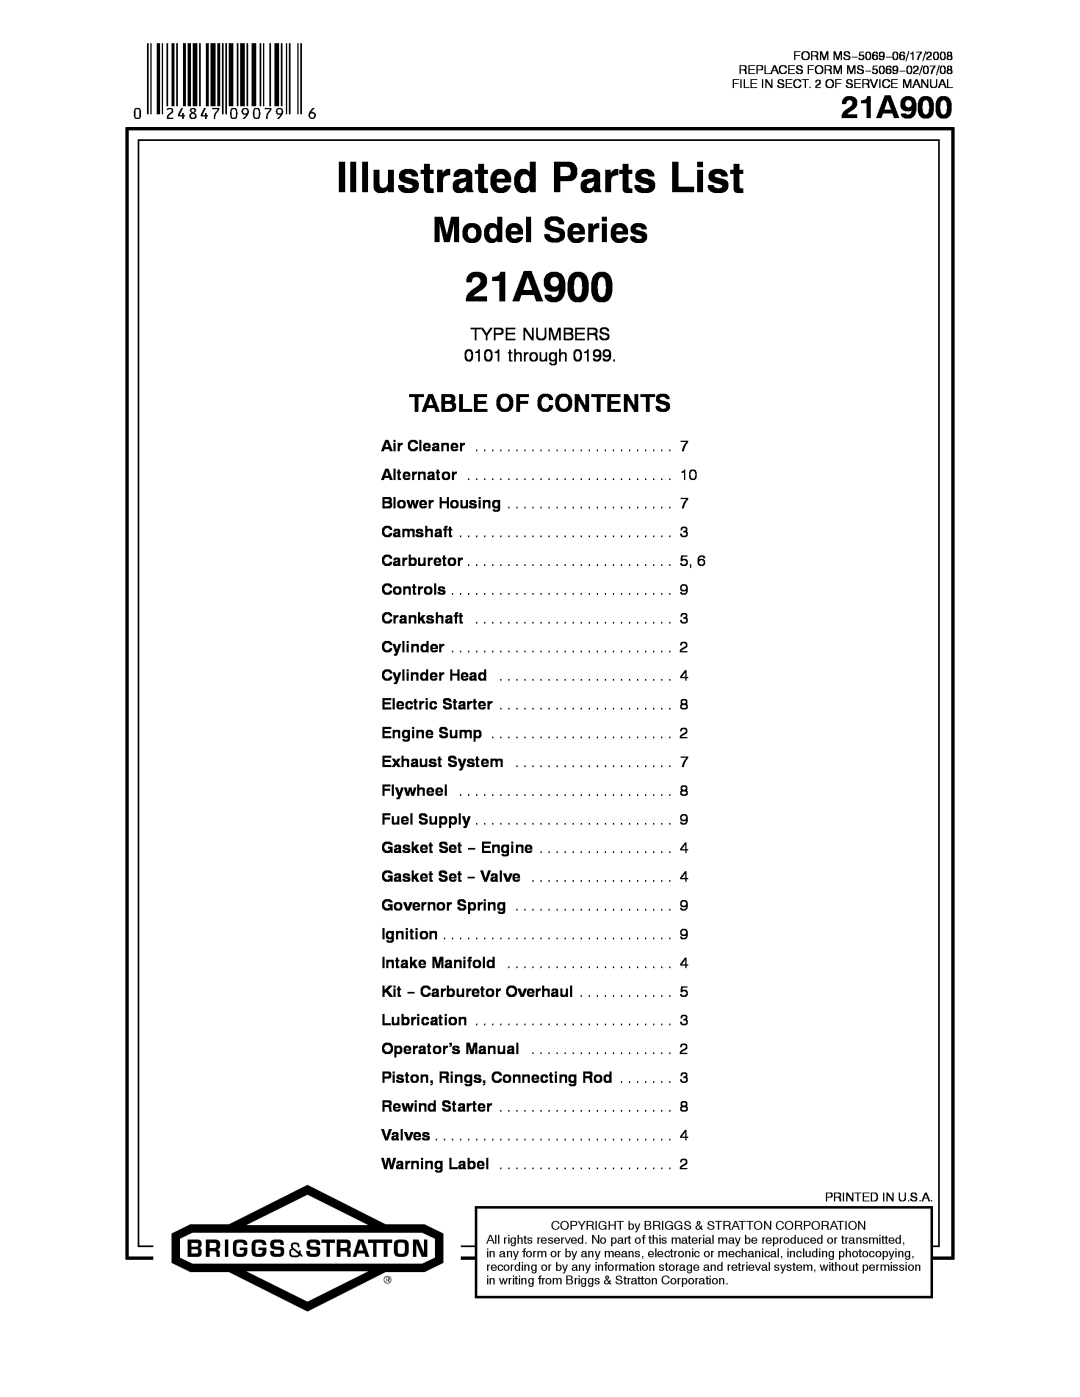 Briggs & Stratton 21A900 service manual Model Series, Illustrated Parts List, Table Of Contents, TYPE NUMBERS 0101 through 